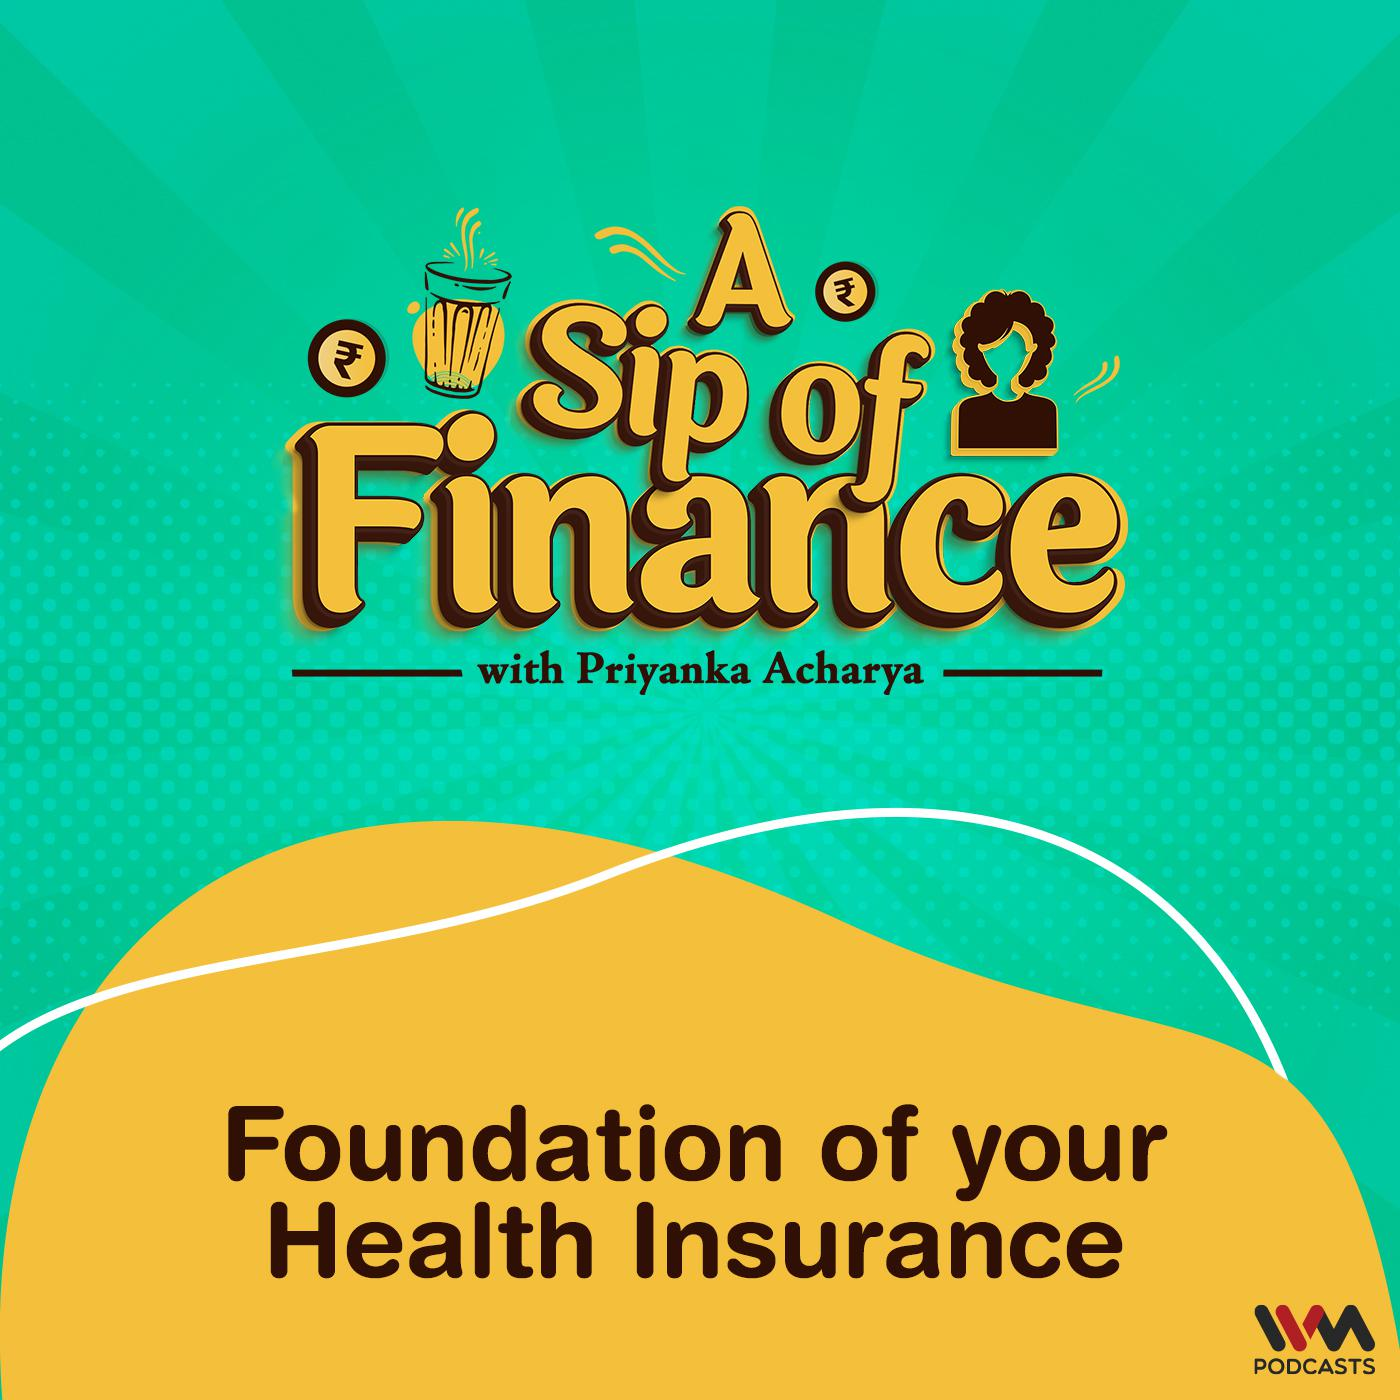 Foundation of your Health Insurance